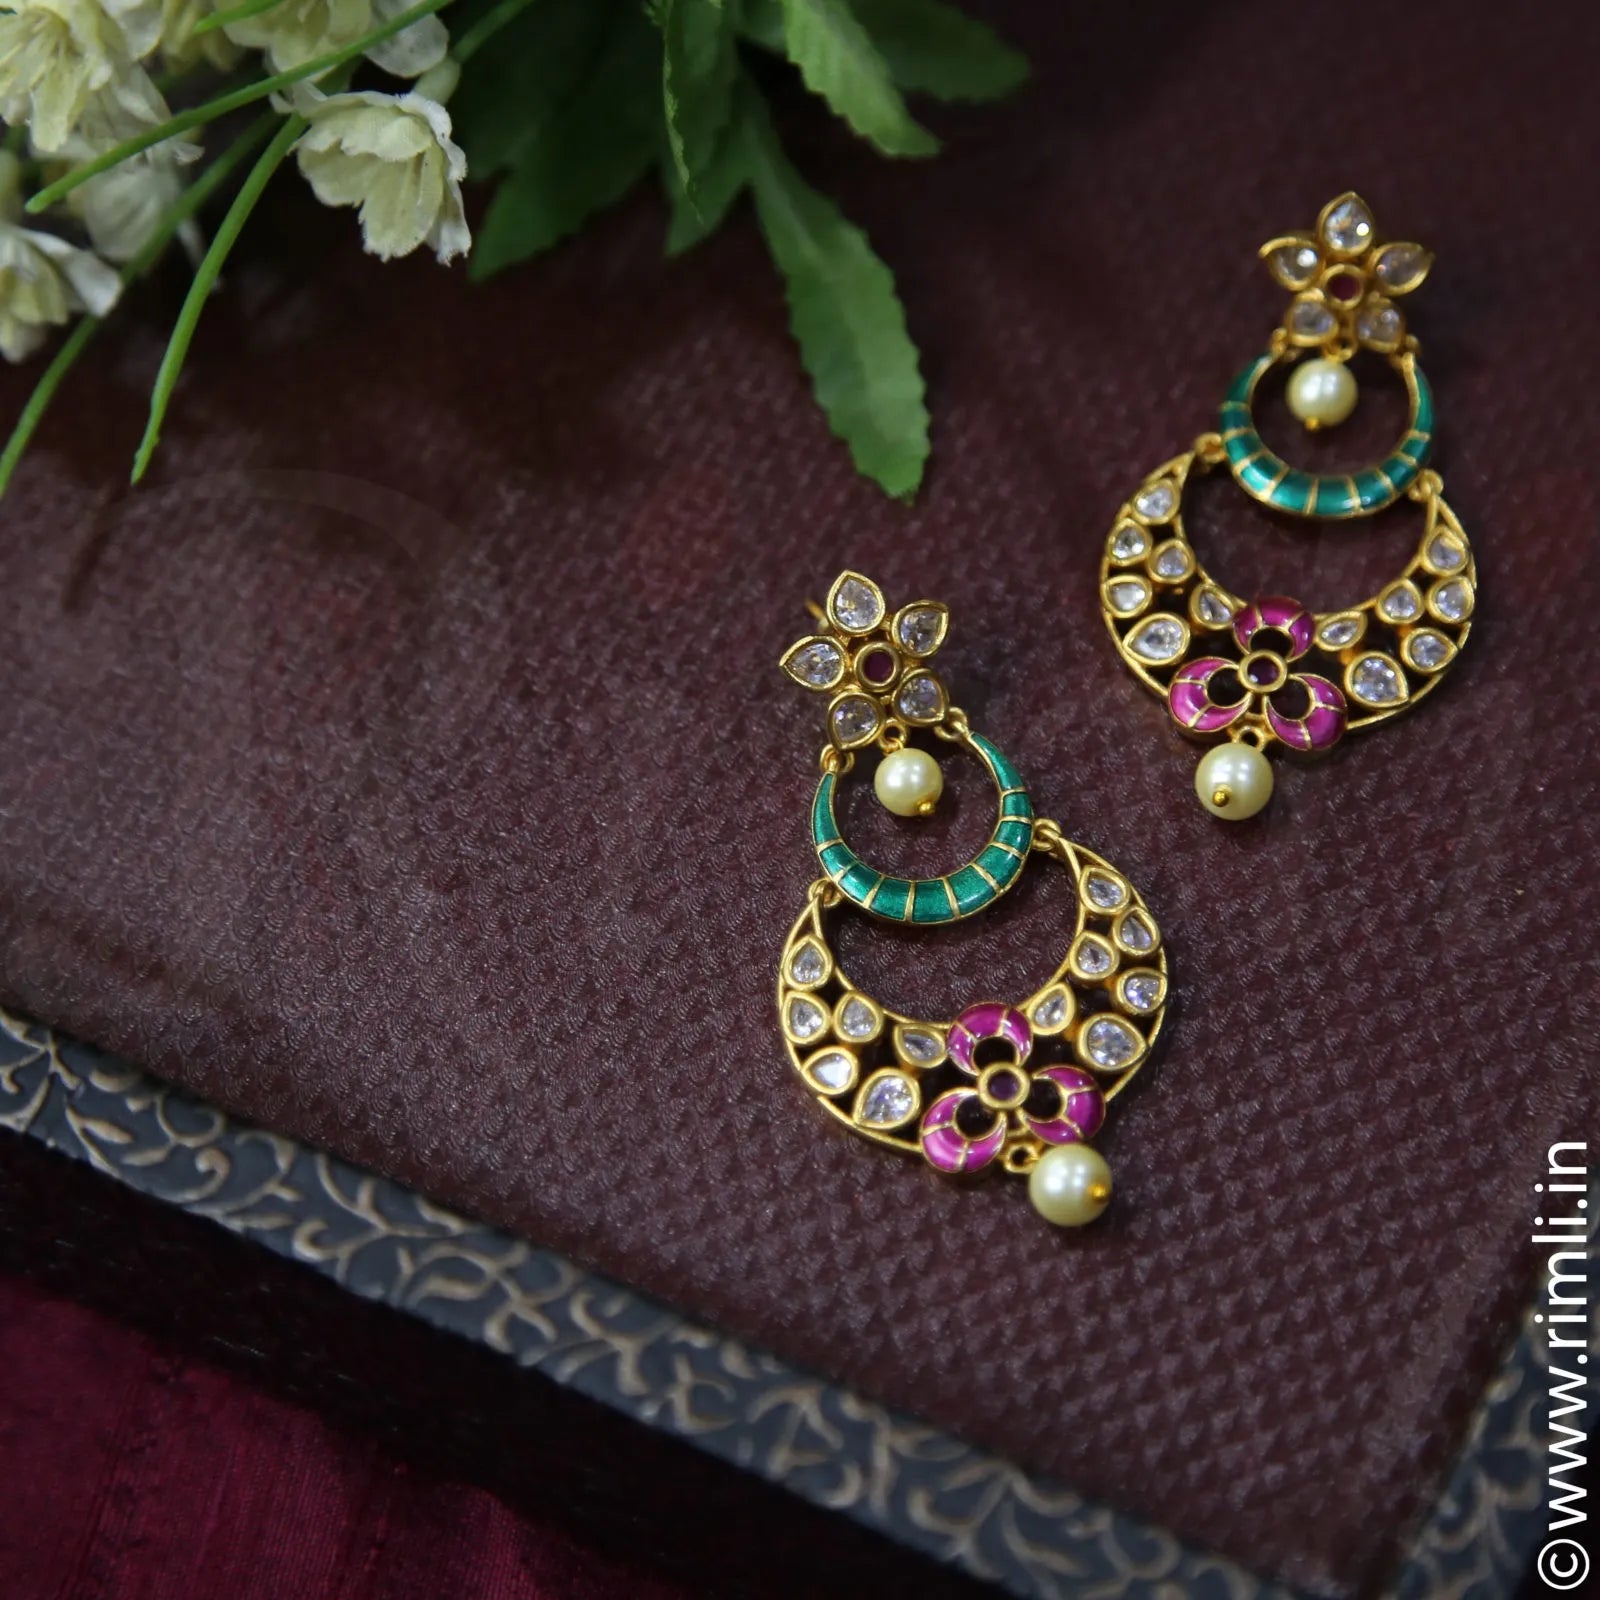 Antique Chandbali Earrings With Stones And Enamel Work